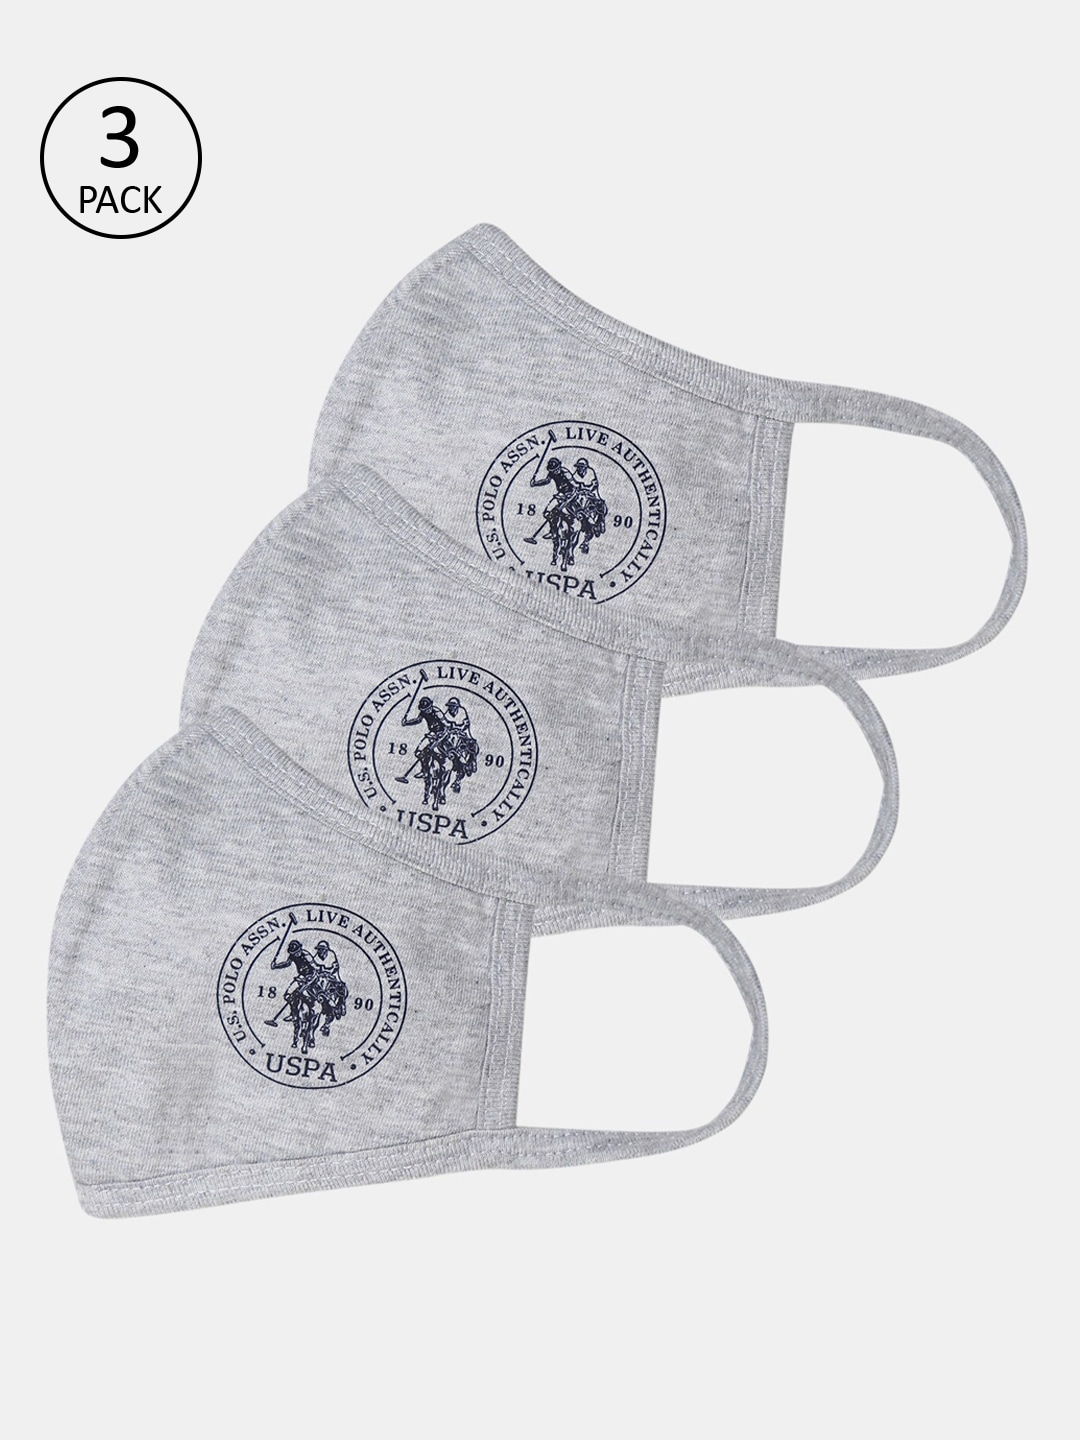 U.S. Polo Assn. Adults Pack of 3 Grey Reusable 3-Ply Cloth Masks Price in India